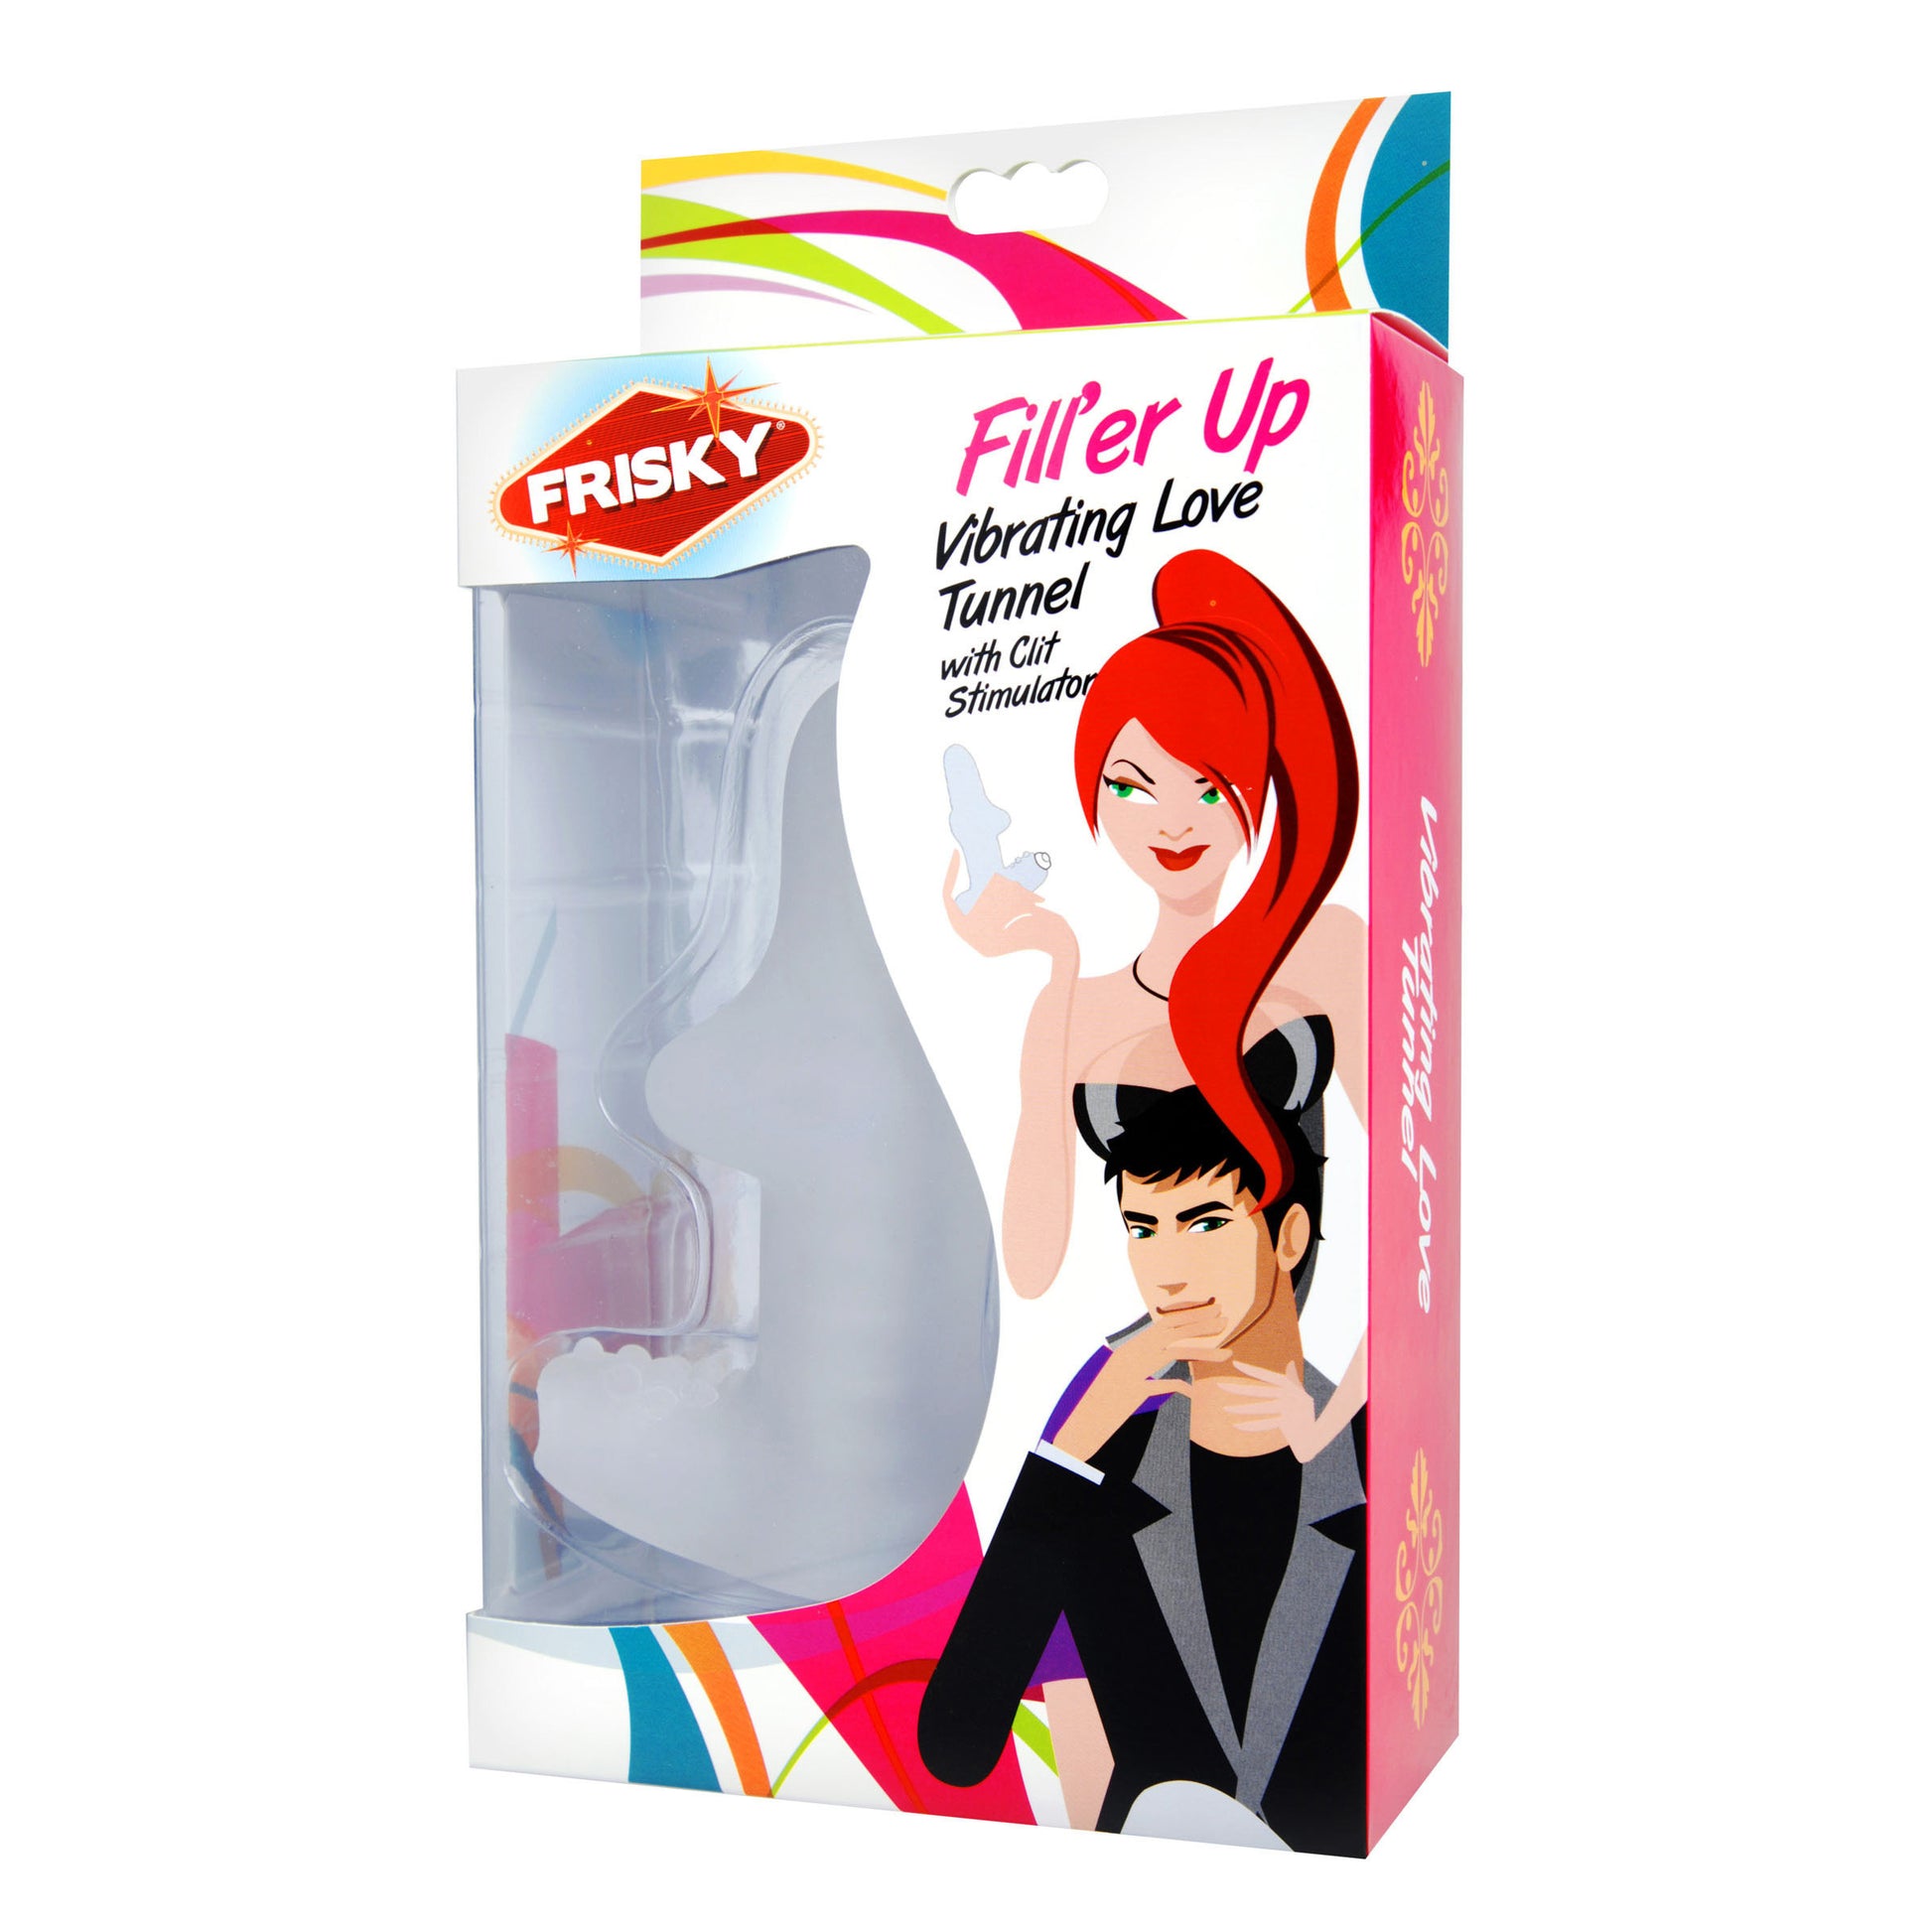 Fill Her Up Vibrating Love Tunnel with Clit Stimulator - UABDSM